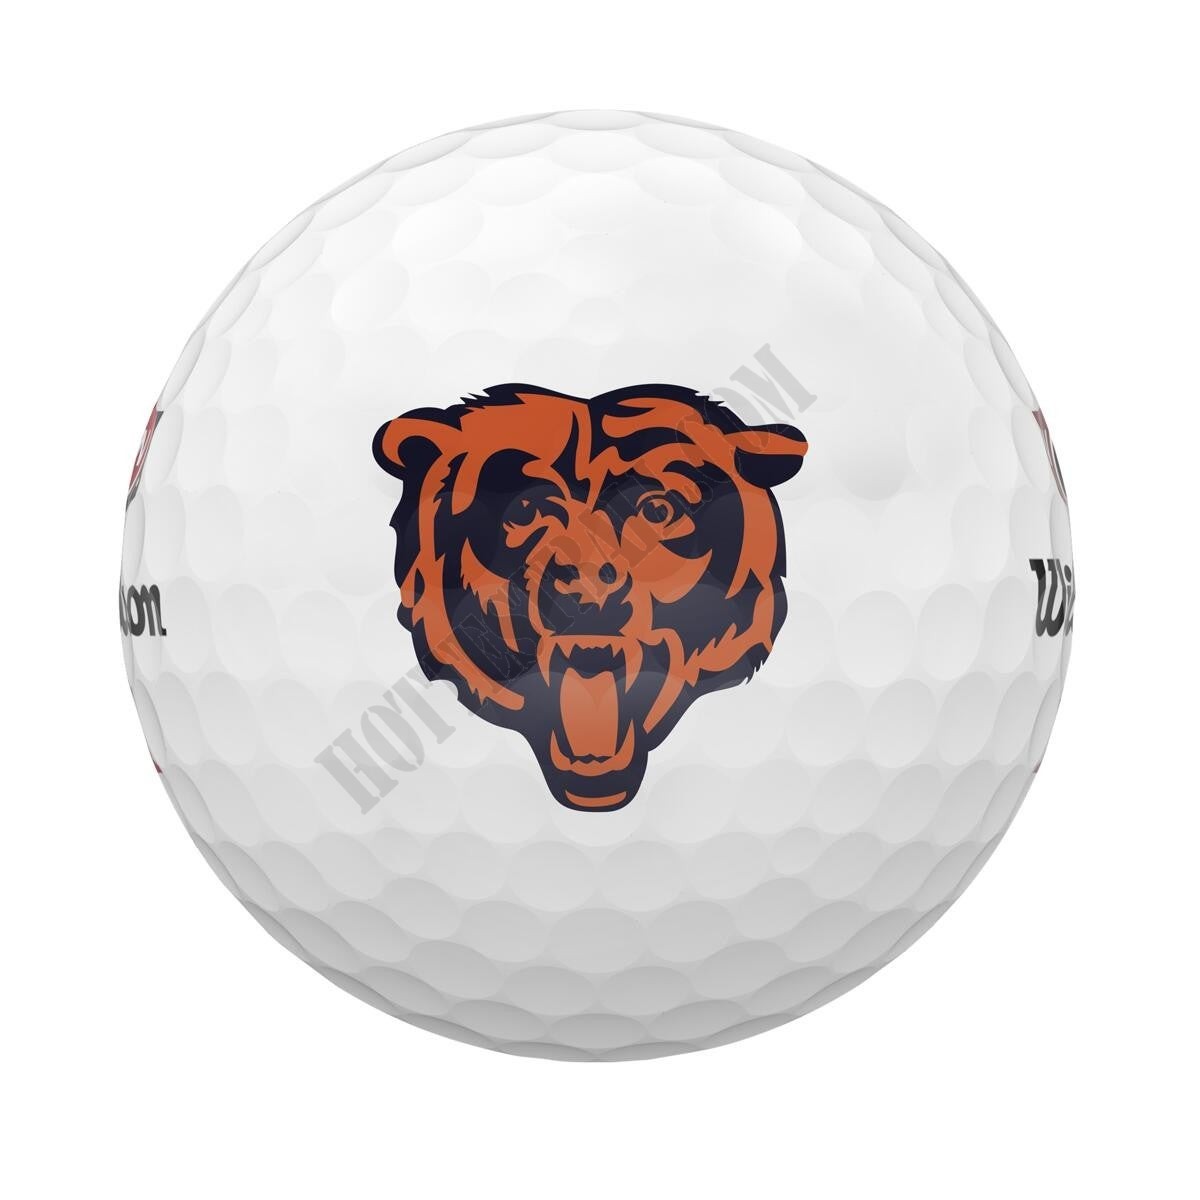 DUO Soft+ NFL Golf Balls - Chicago Bears ● Wilson Promotions - -1